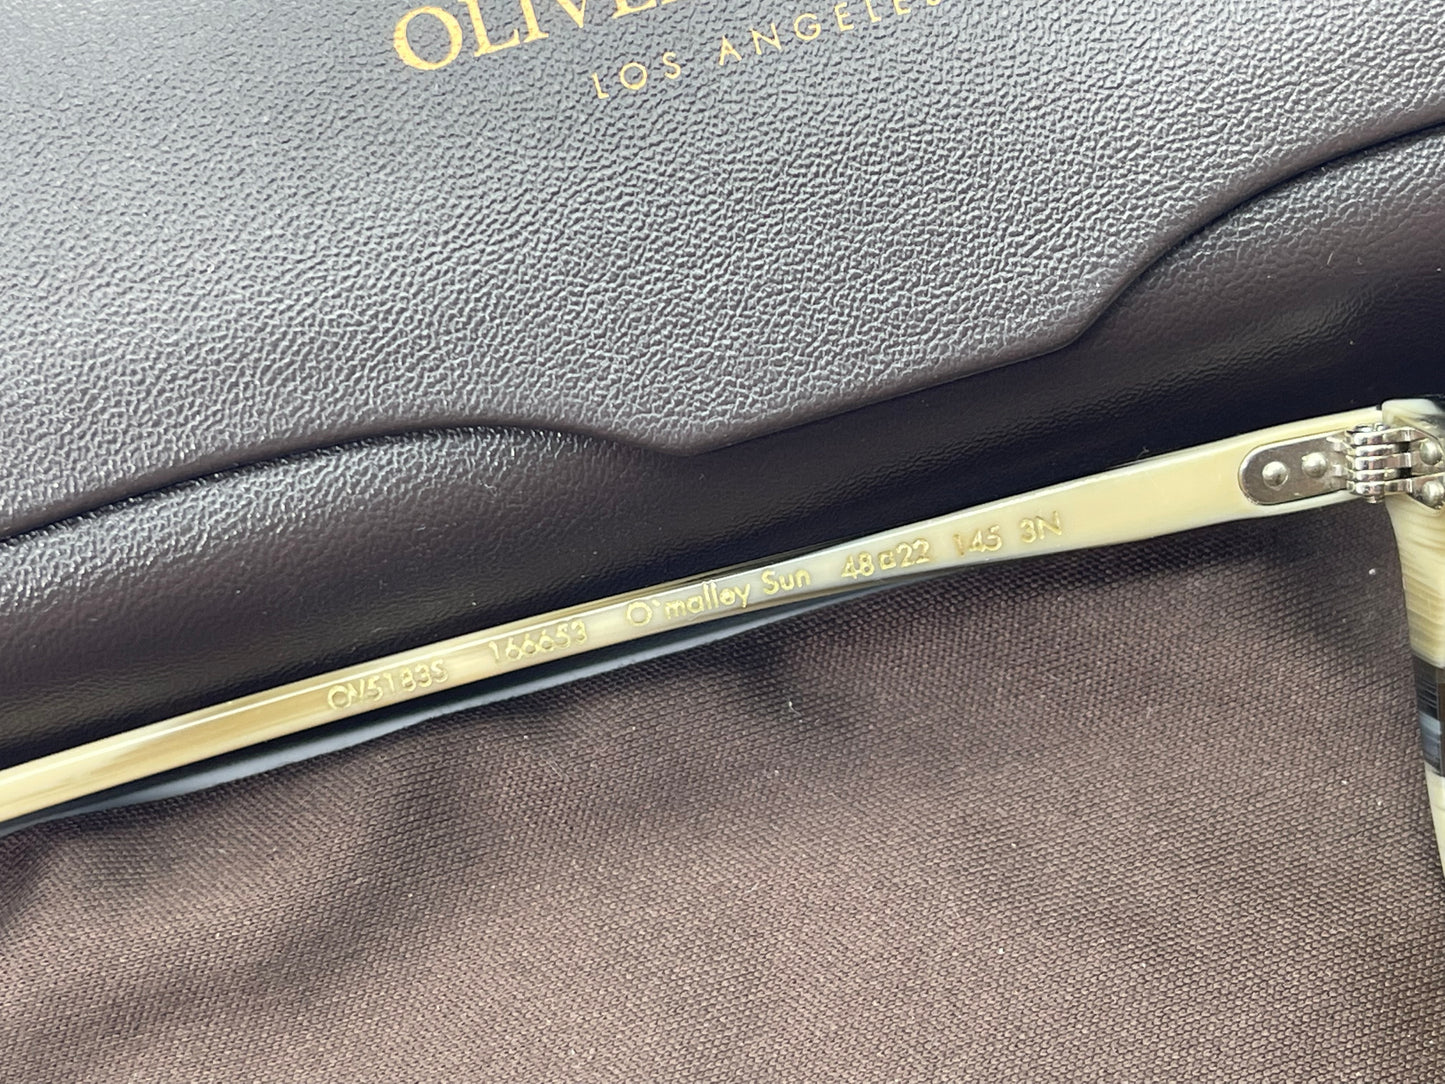 Oliver peoples o’mally for- Boyet